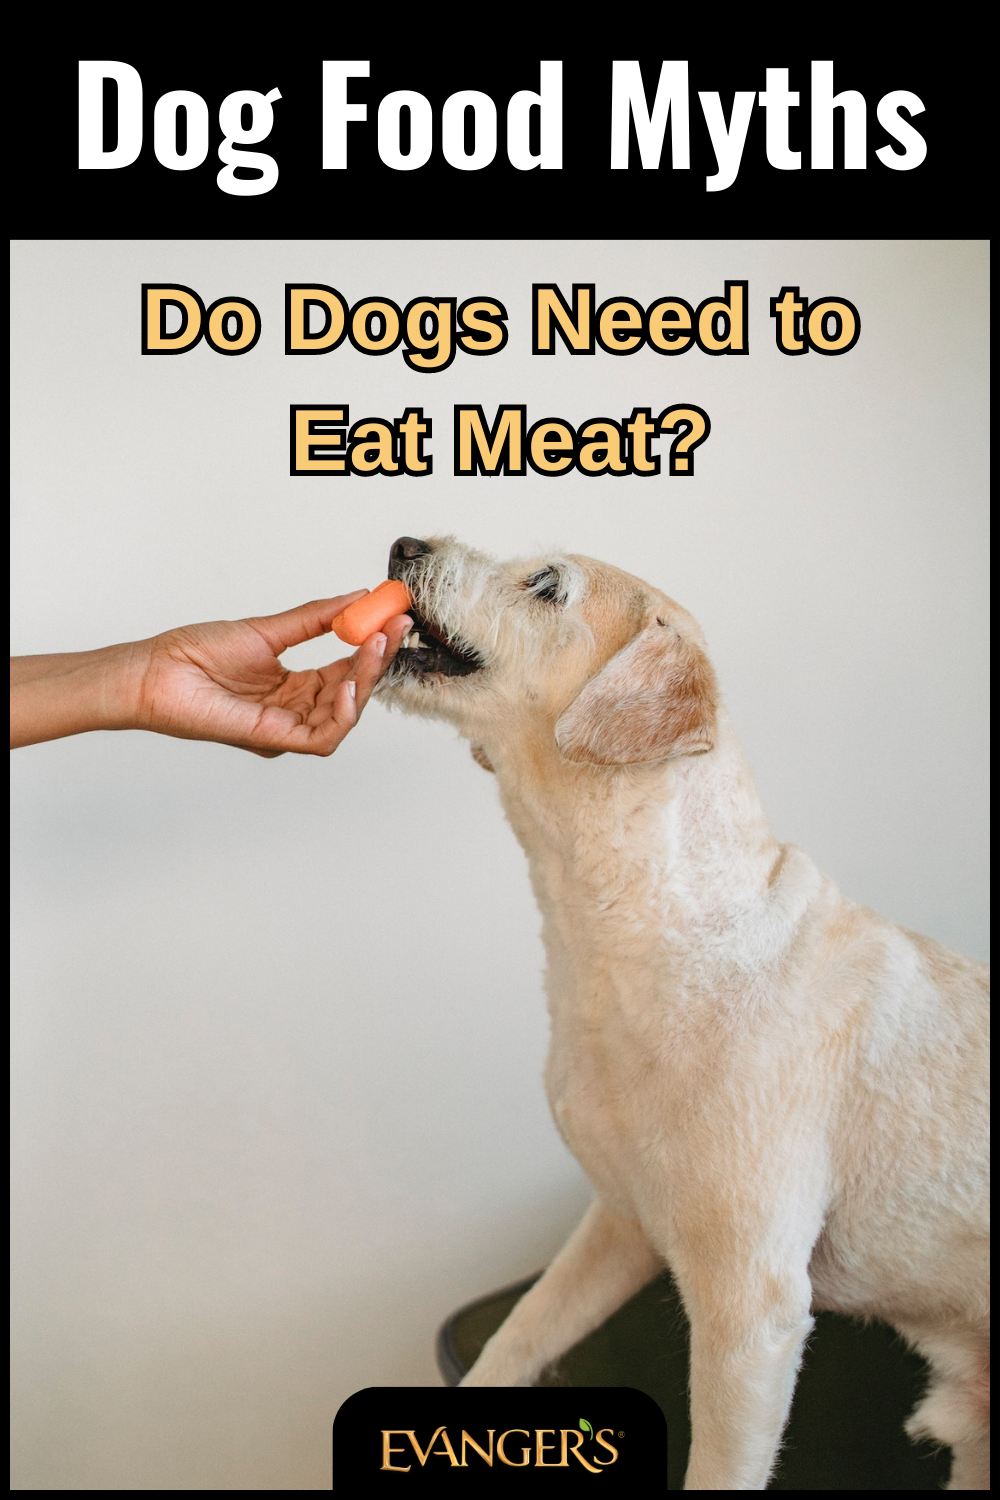 Dog Food Myths: Do Dogs Need to Eat Meat?